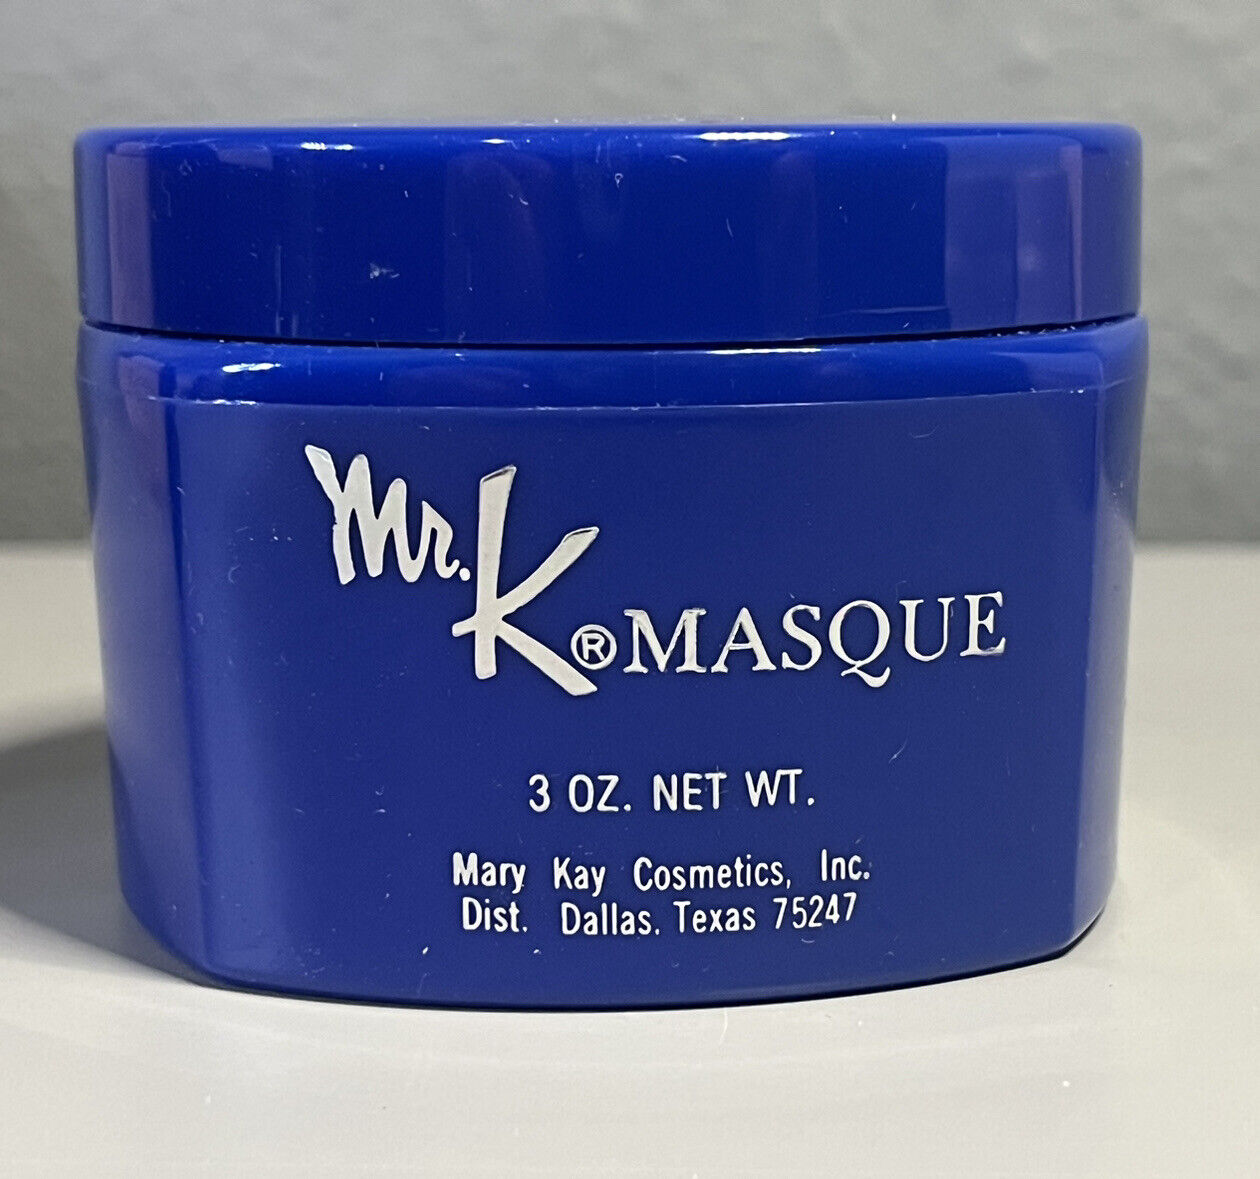 Vtg 1970's Container Mary Kay Cosmetics Mr. K Masque Mask 3oz Collectible Bottle